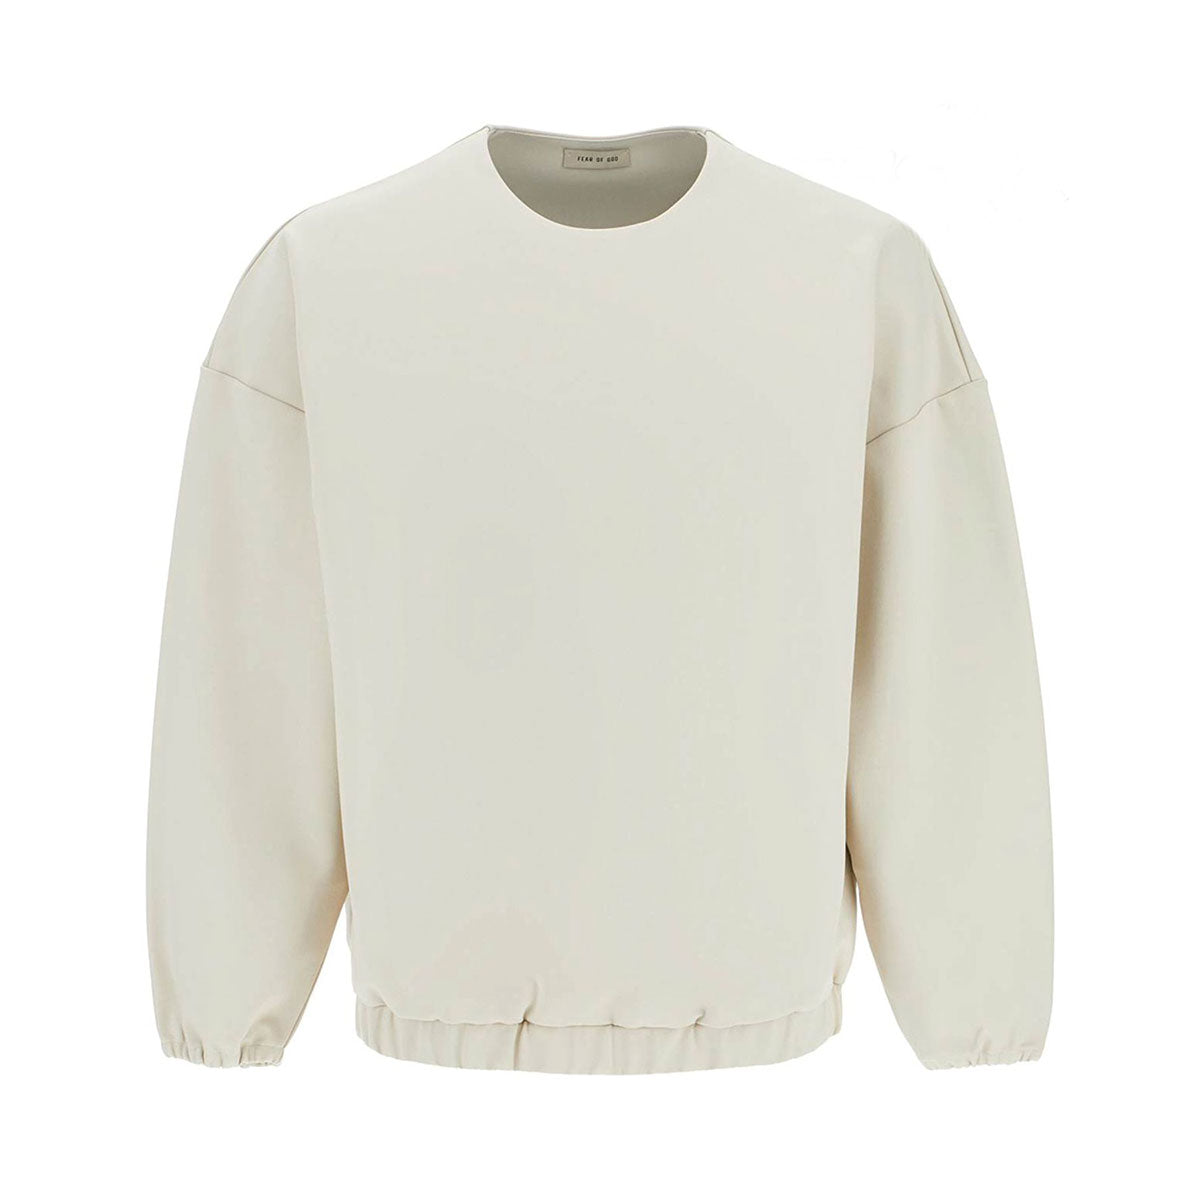 Eternal Viscose Tricot Crewneck | Why are you here?